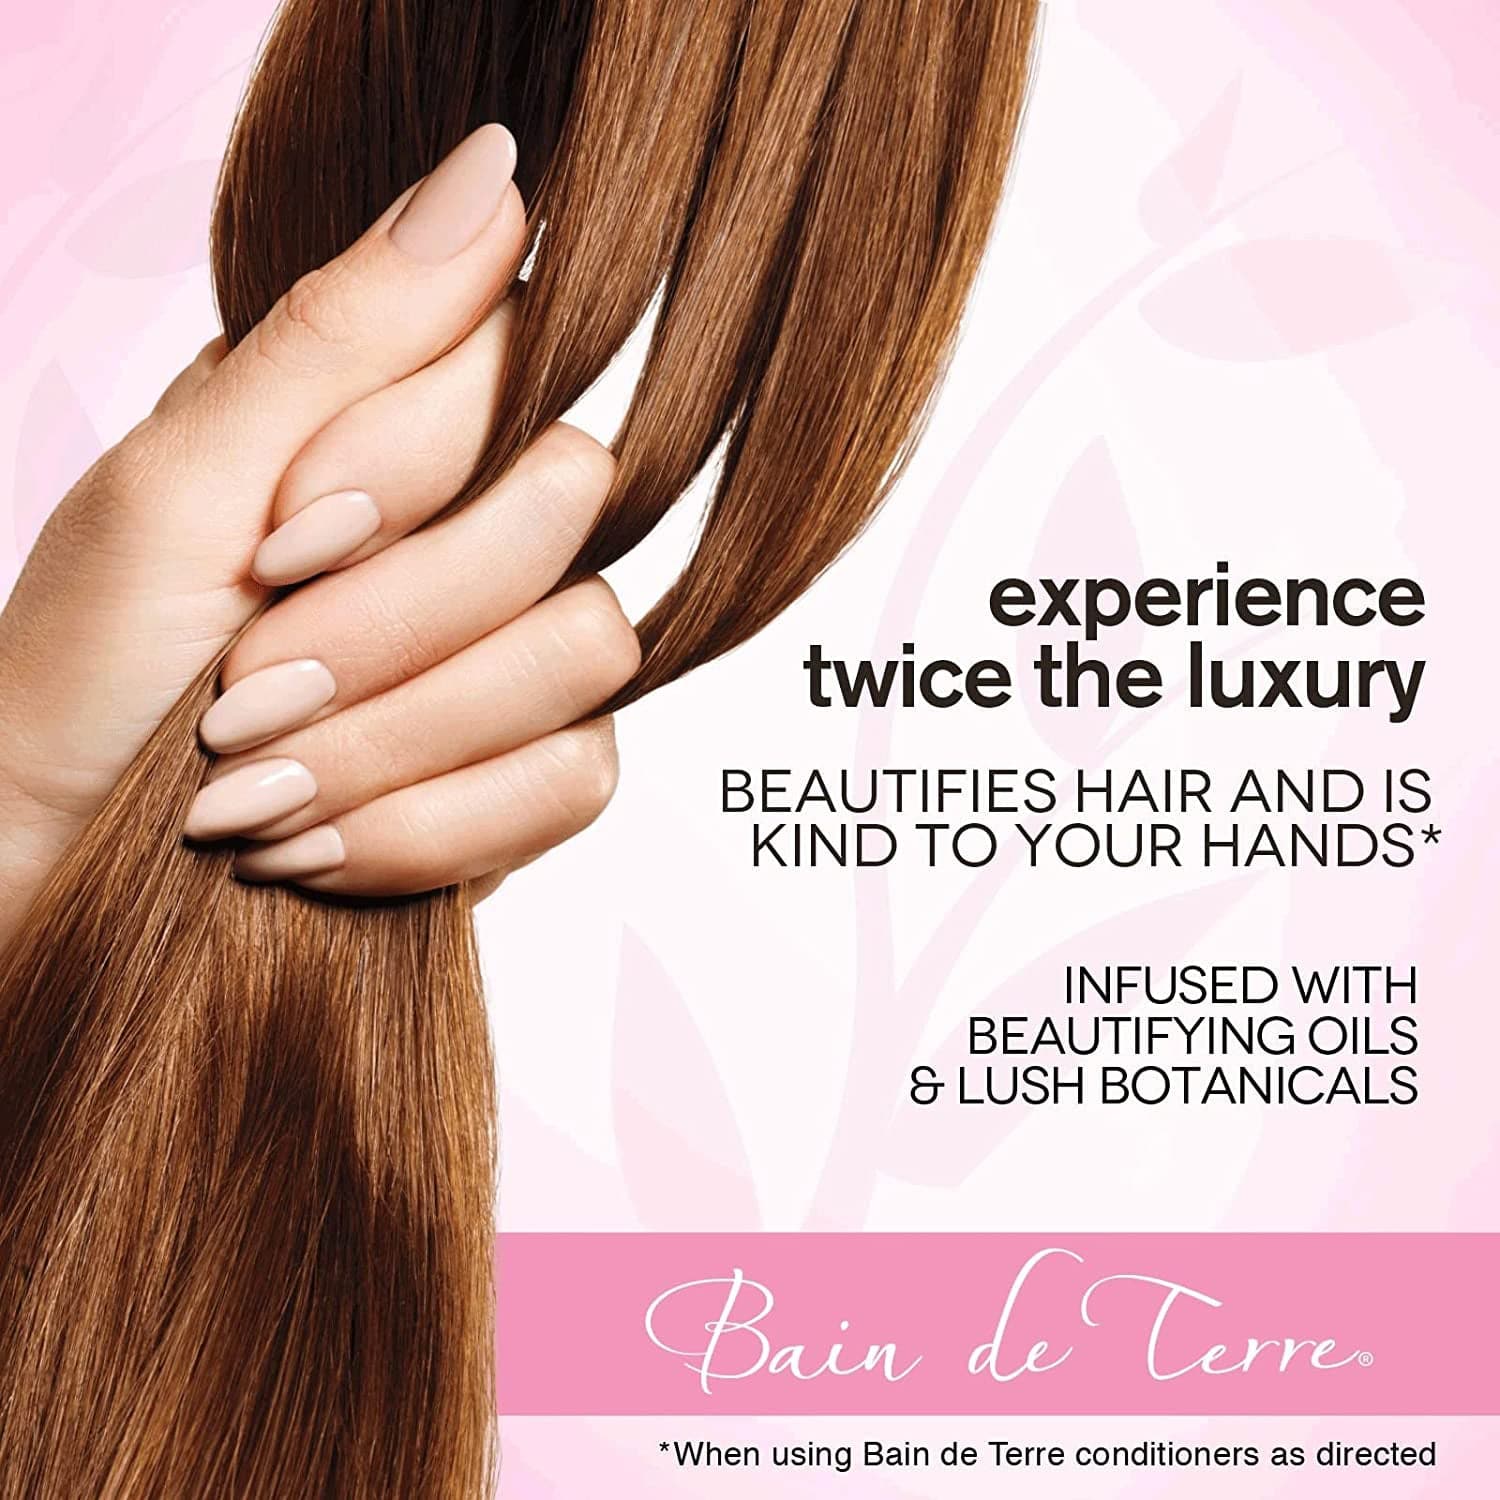 experience twice the luxury. Beautifies hair and is kind to your hands when using Bain de Terre conditioners as direct. Infused with Beautifying Oils & Lush Botanicals